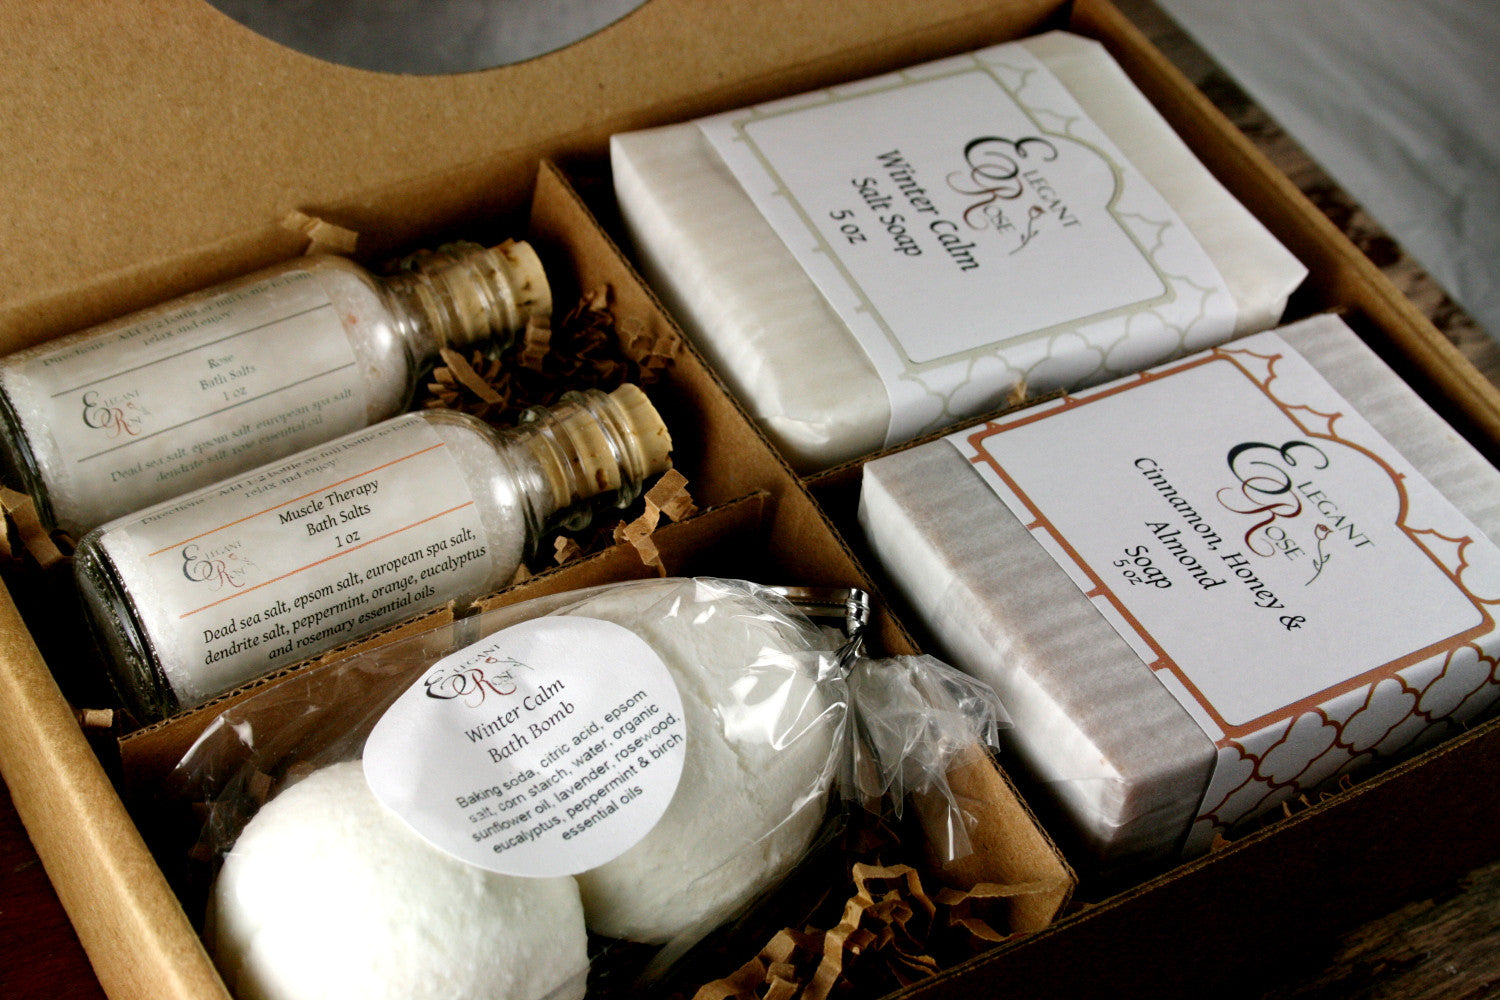 Pampering Gift Set - Mothers Day Gift, Gift for Mom, Gift for Her